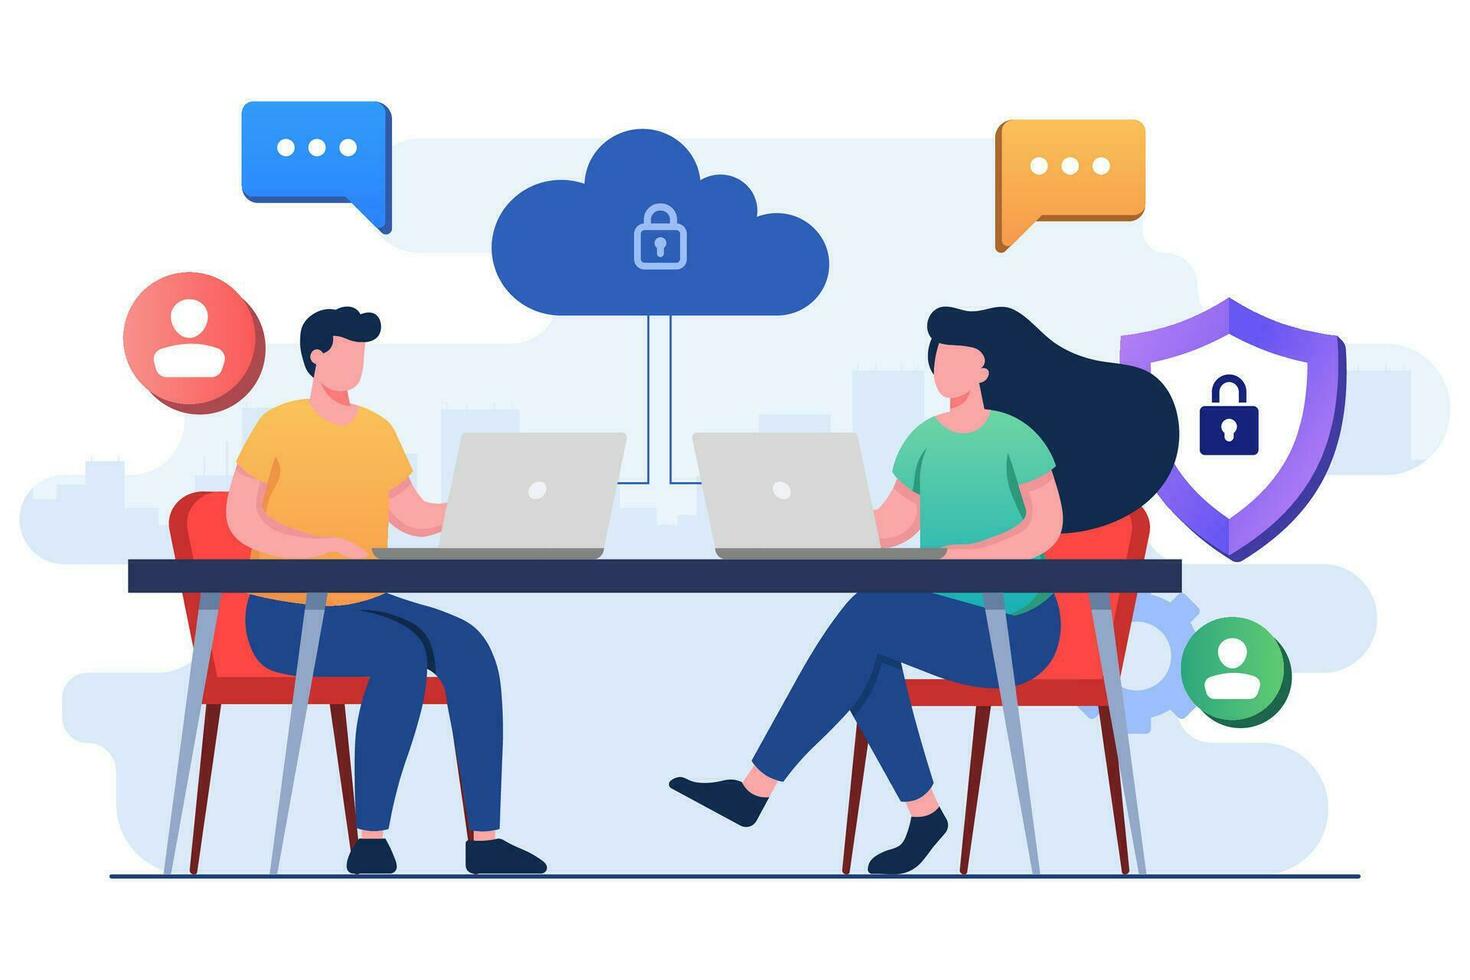 Various devices securely connected to data center with cloud Computing technology, Cyber security, Personal data protection flat illustration vector concept